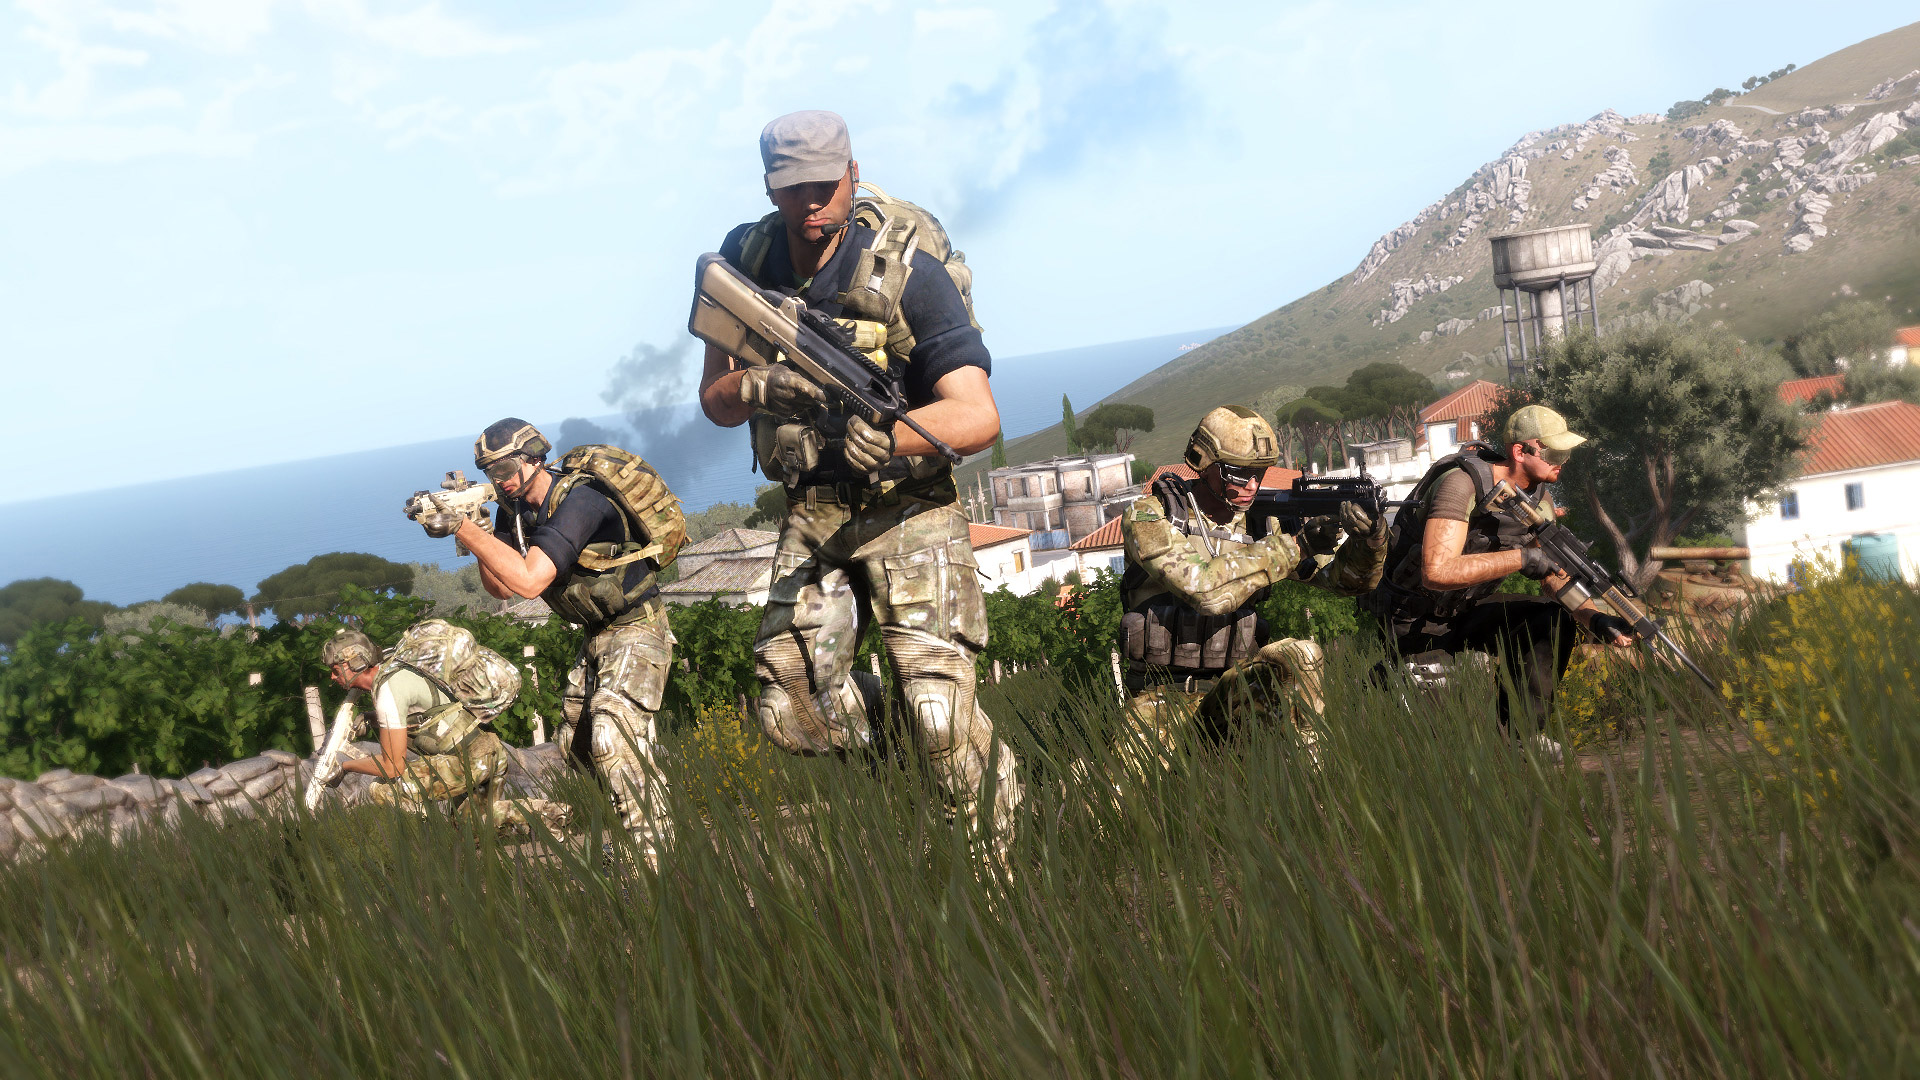 ARMA 3 SPECIAL EDITION DELUXE PACKAGE – BOHEMIA INTERACTIVE